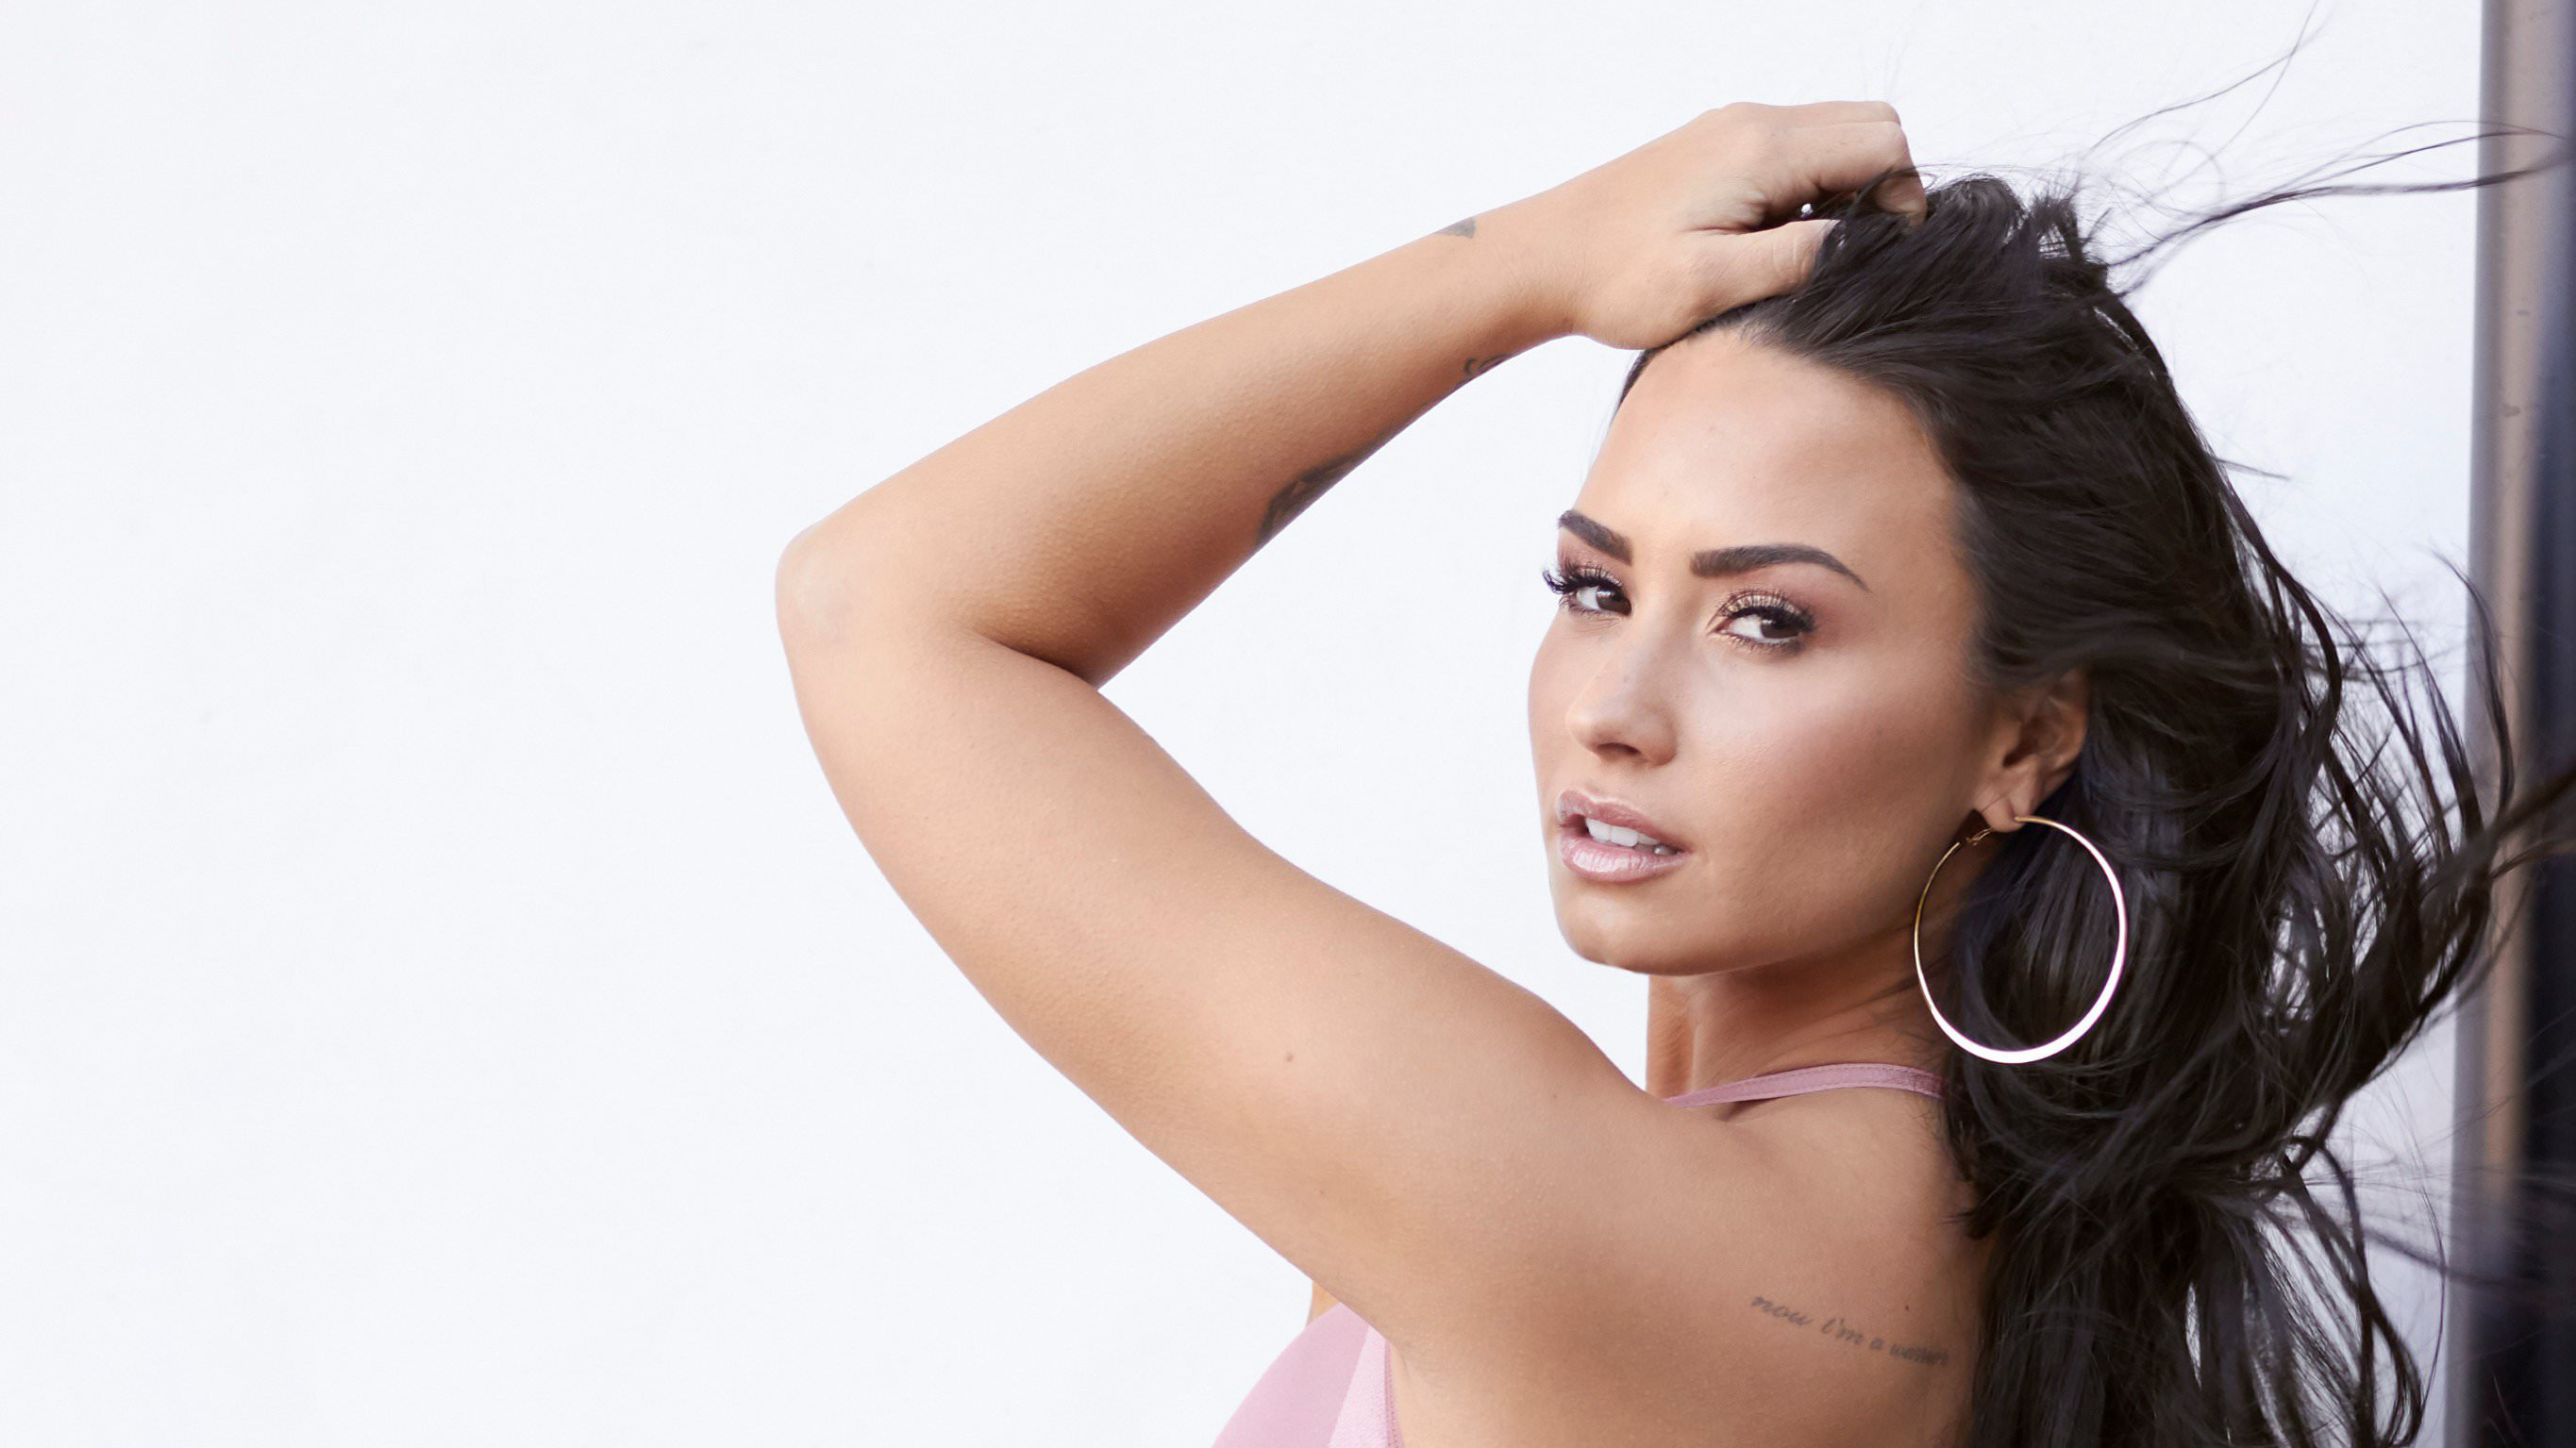 Demi lovato hd music k wallpapers images backgrounds photos and pictures